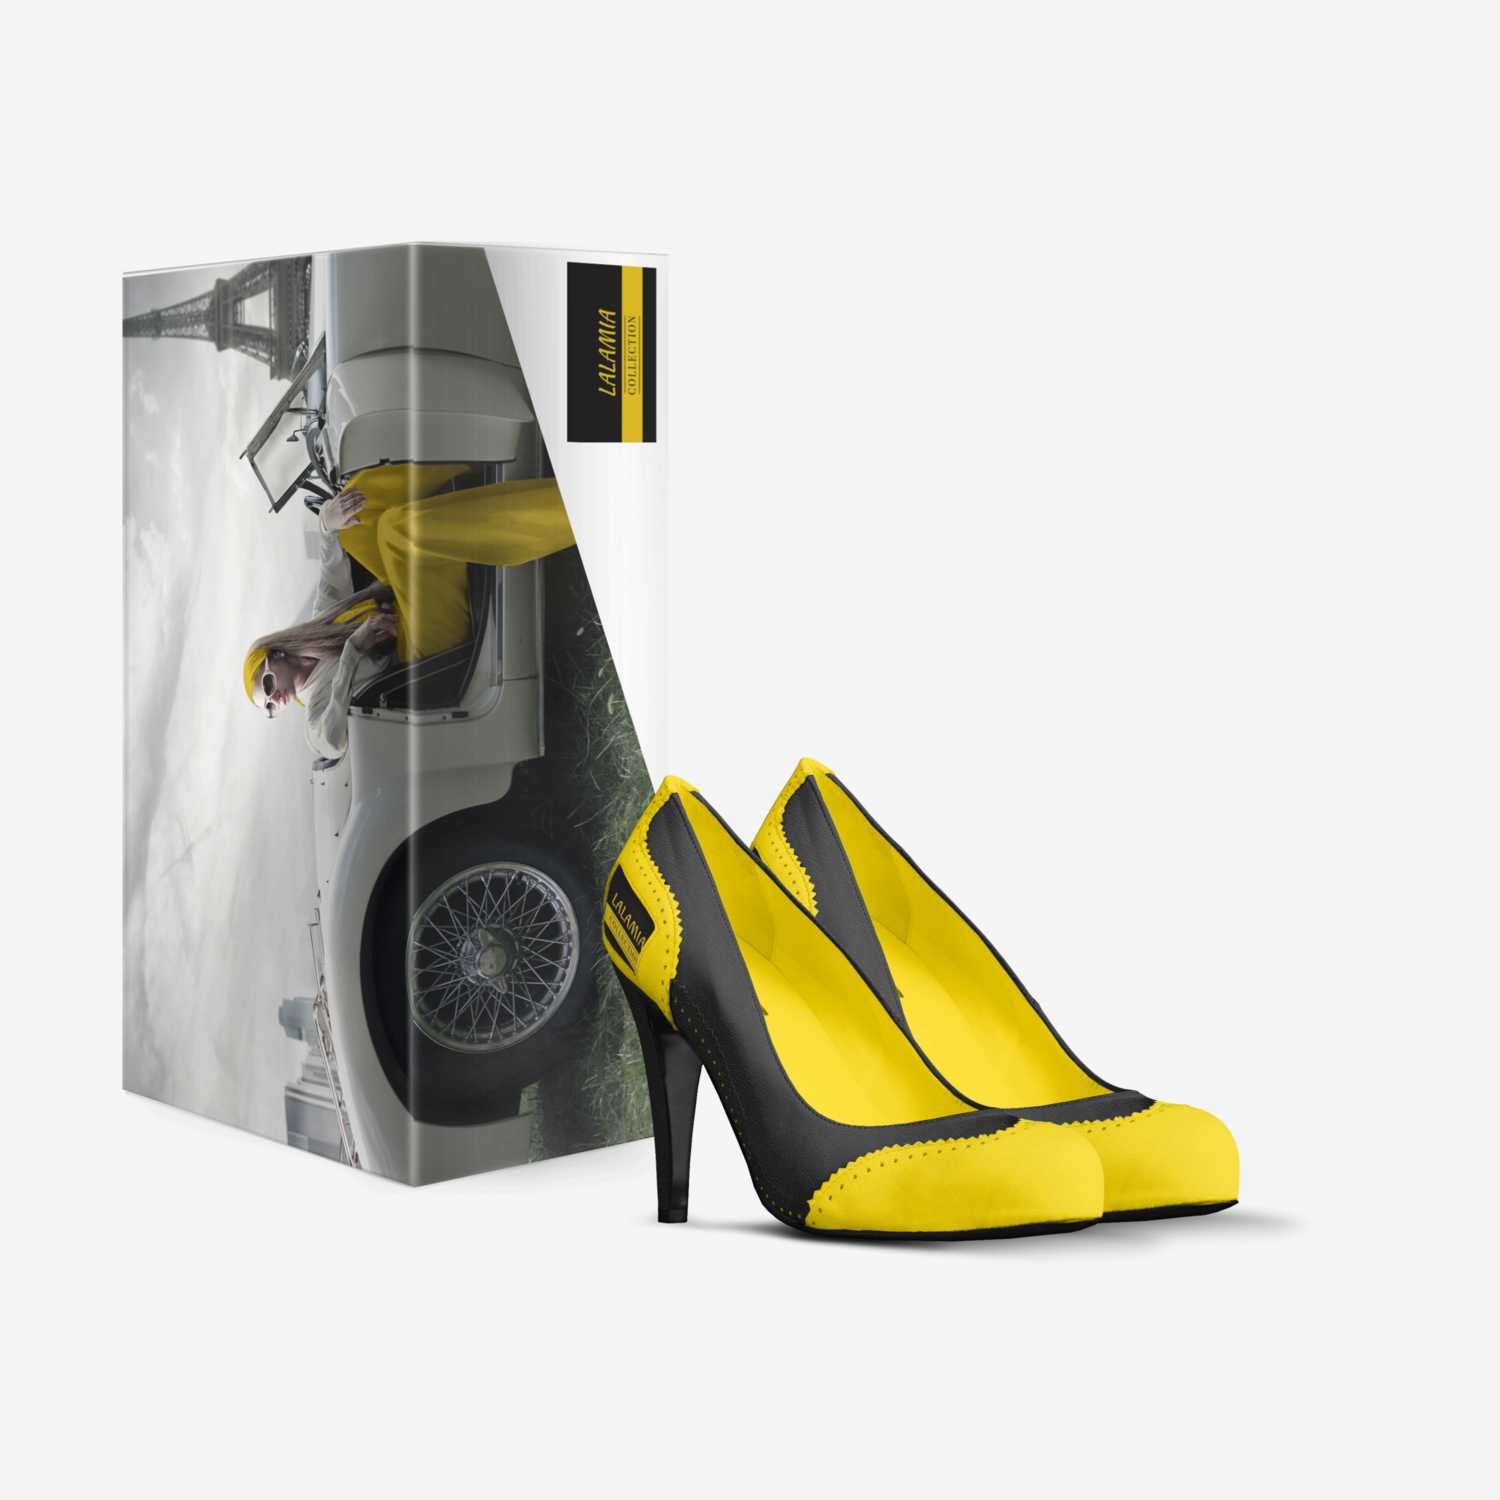 LALAMIA custom made in Italy shoes by Lillian R Herrera | Box view